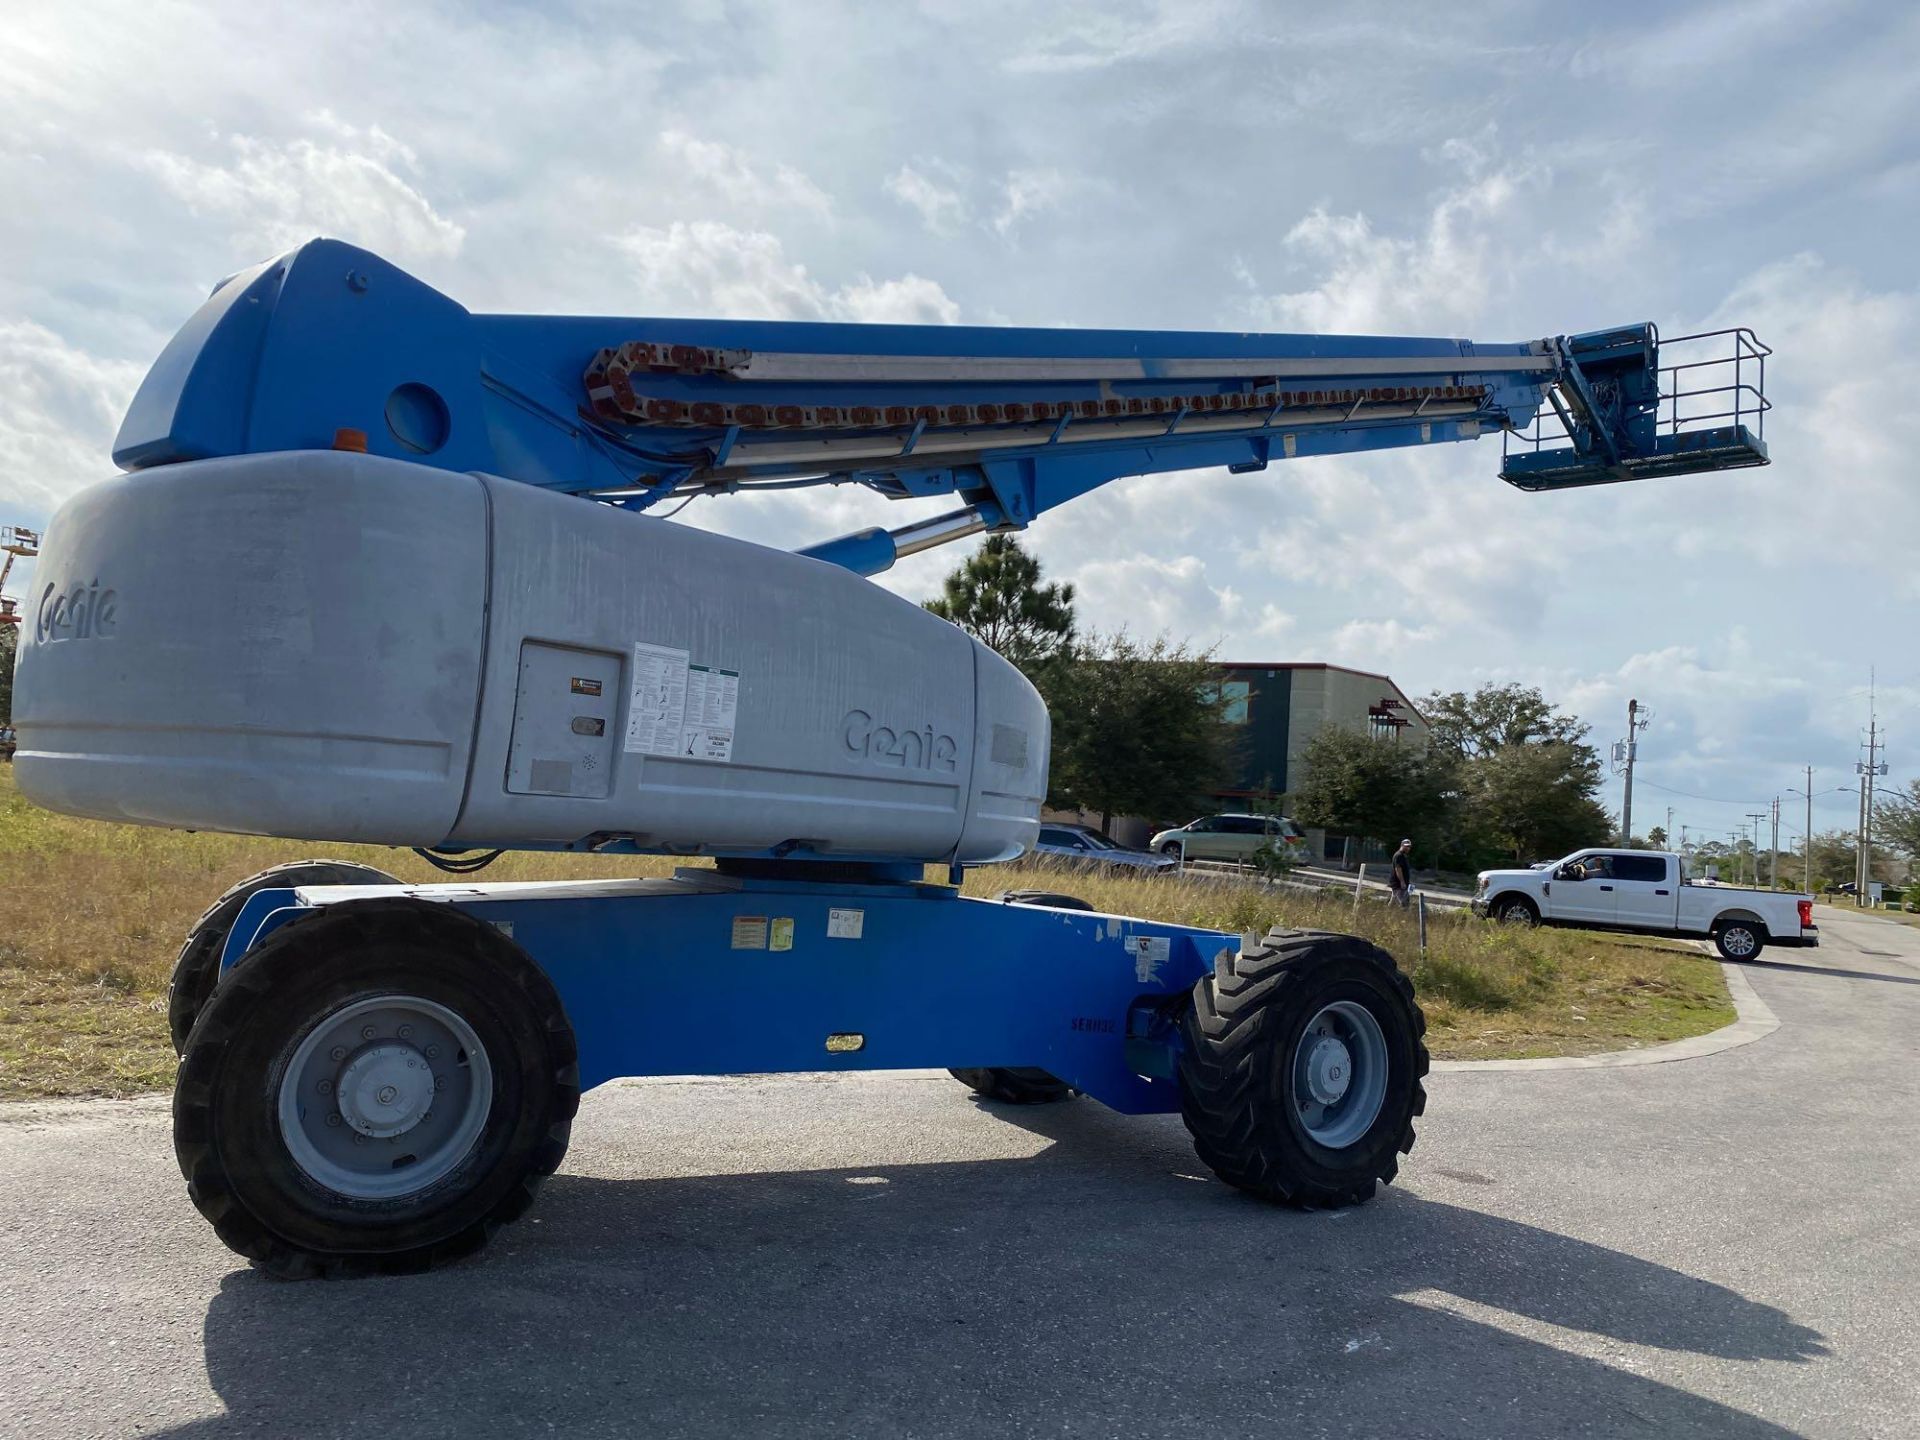 GENIE S125 BOOM LIFT 4x4, POWERED BY PERKINS DIESEL ENGINE, 125FL PLATFORM HEIGHT, RUNS AND OPERATES - Image 5 of 7